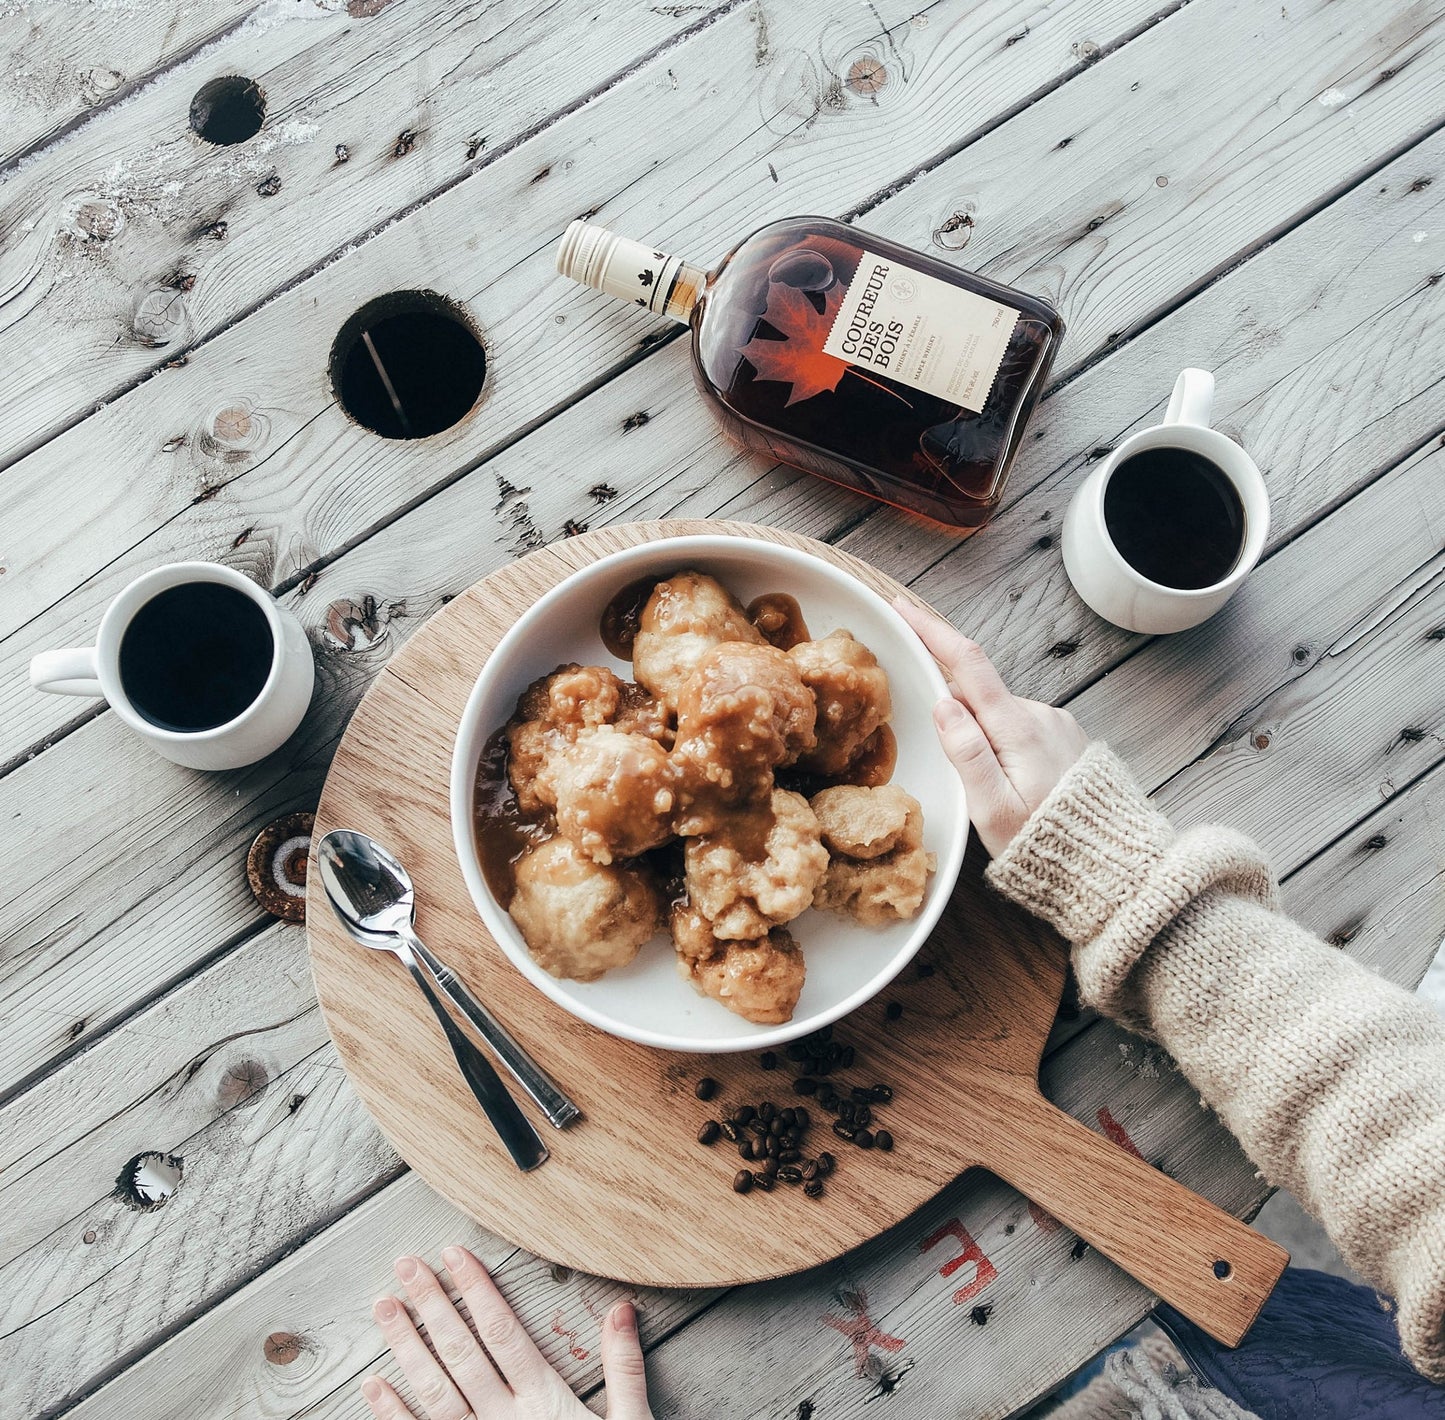 Dumplings in maple syrup with coffee and maple whiskey